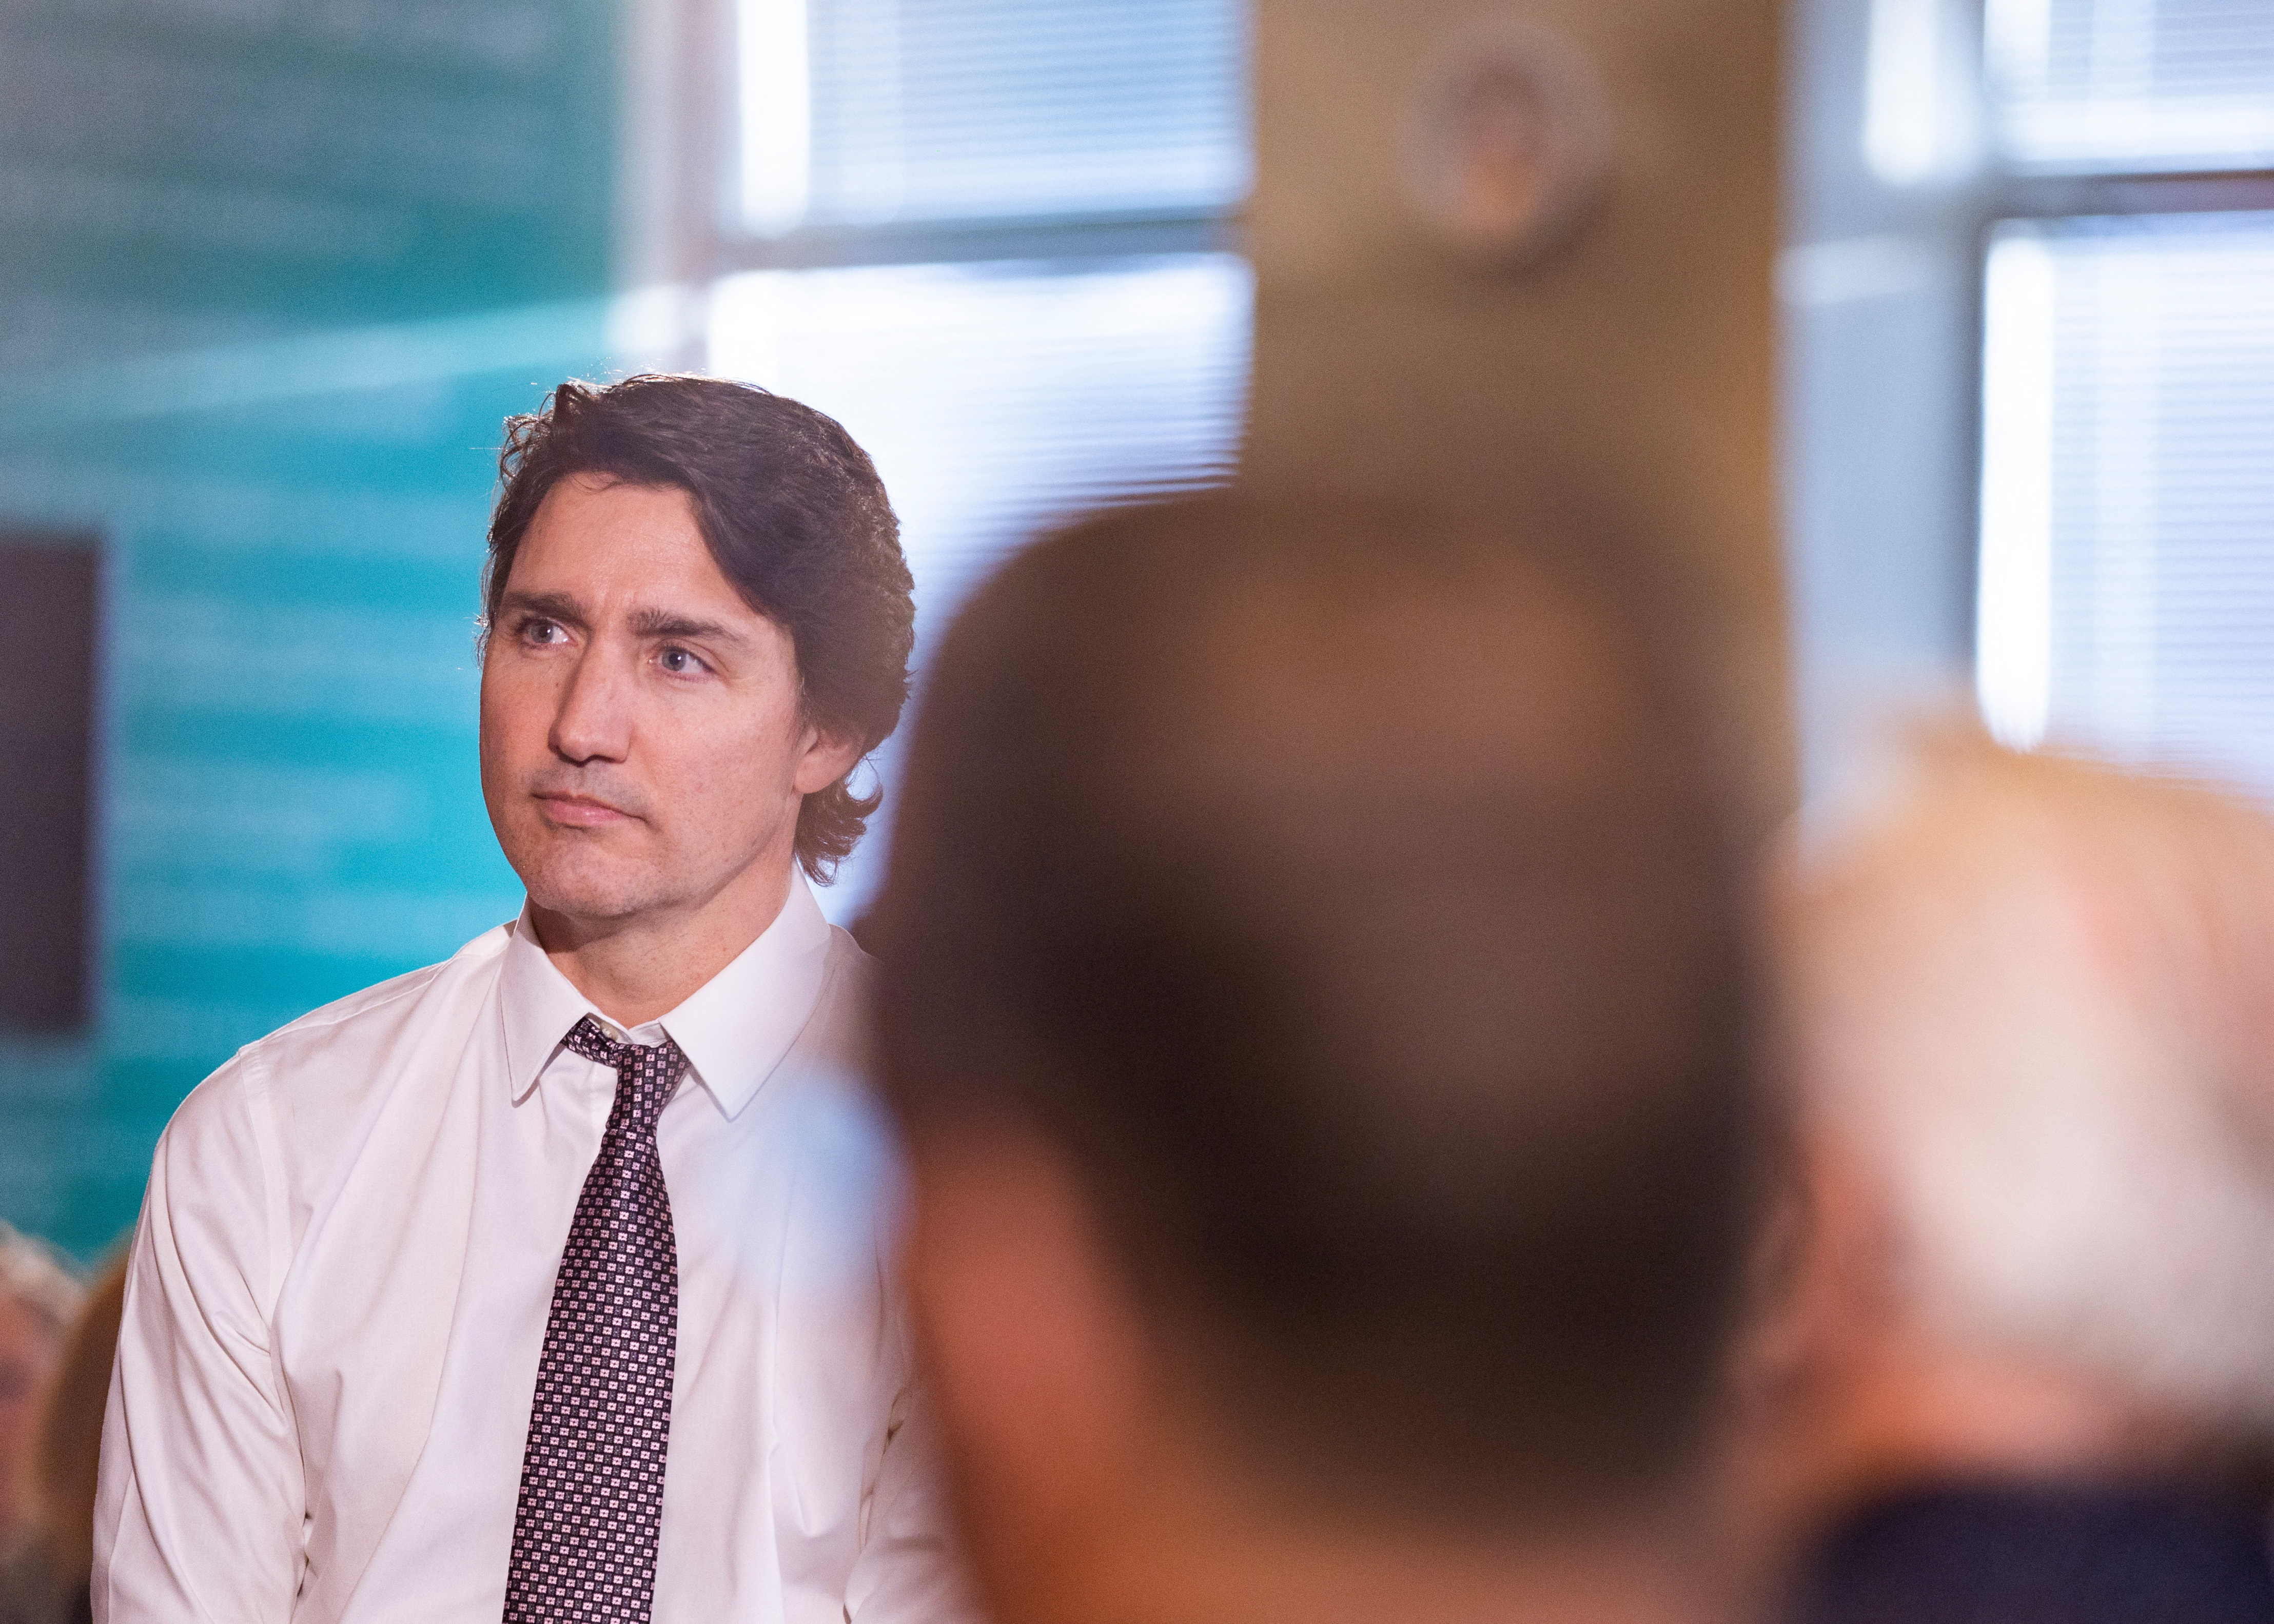 Canada's Prime Minister Justin Trudeau visits Longueuil